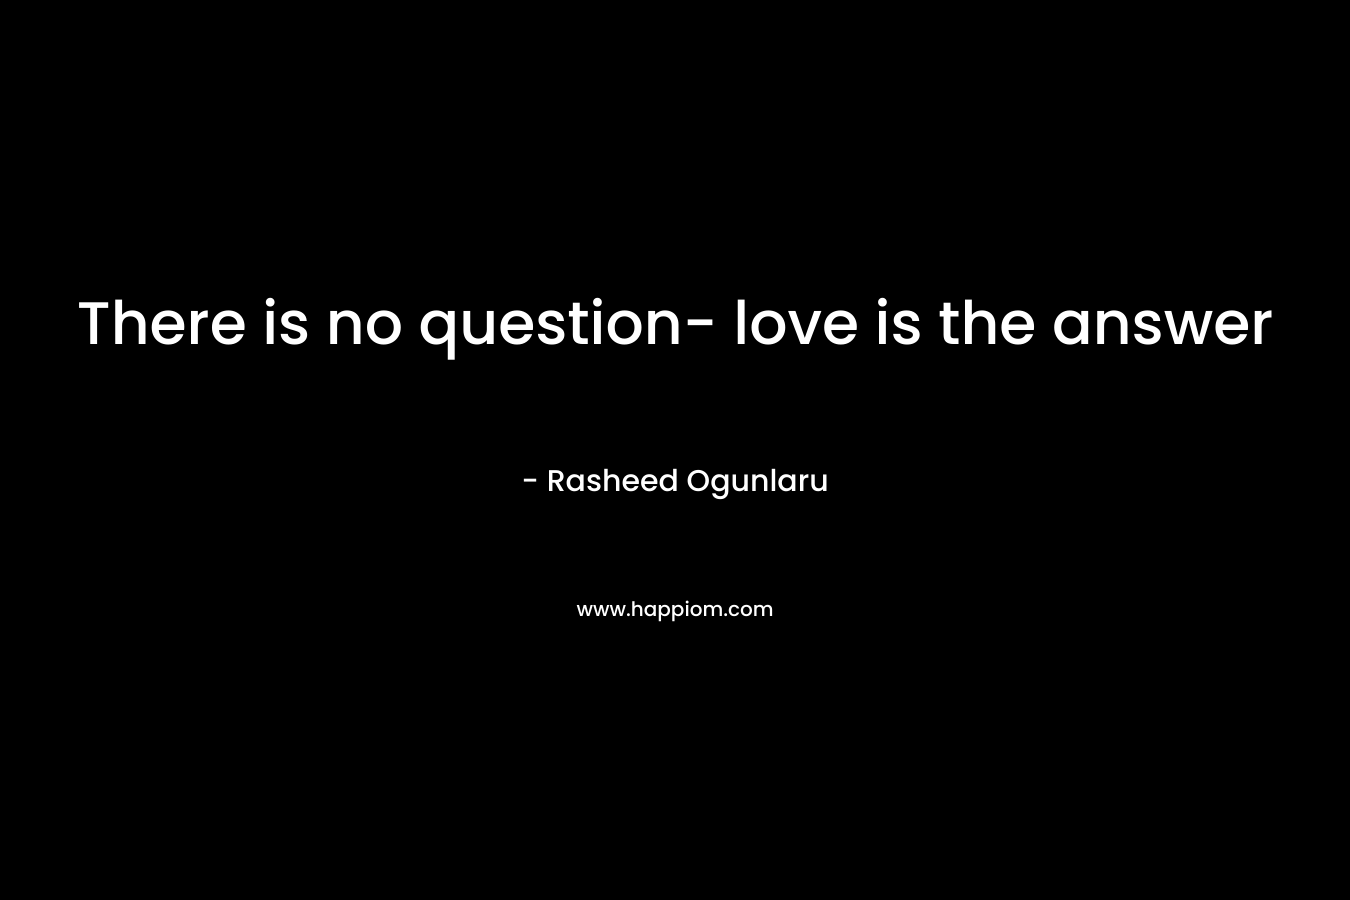 There is no question- love is the answer